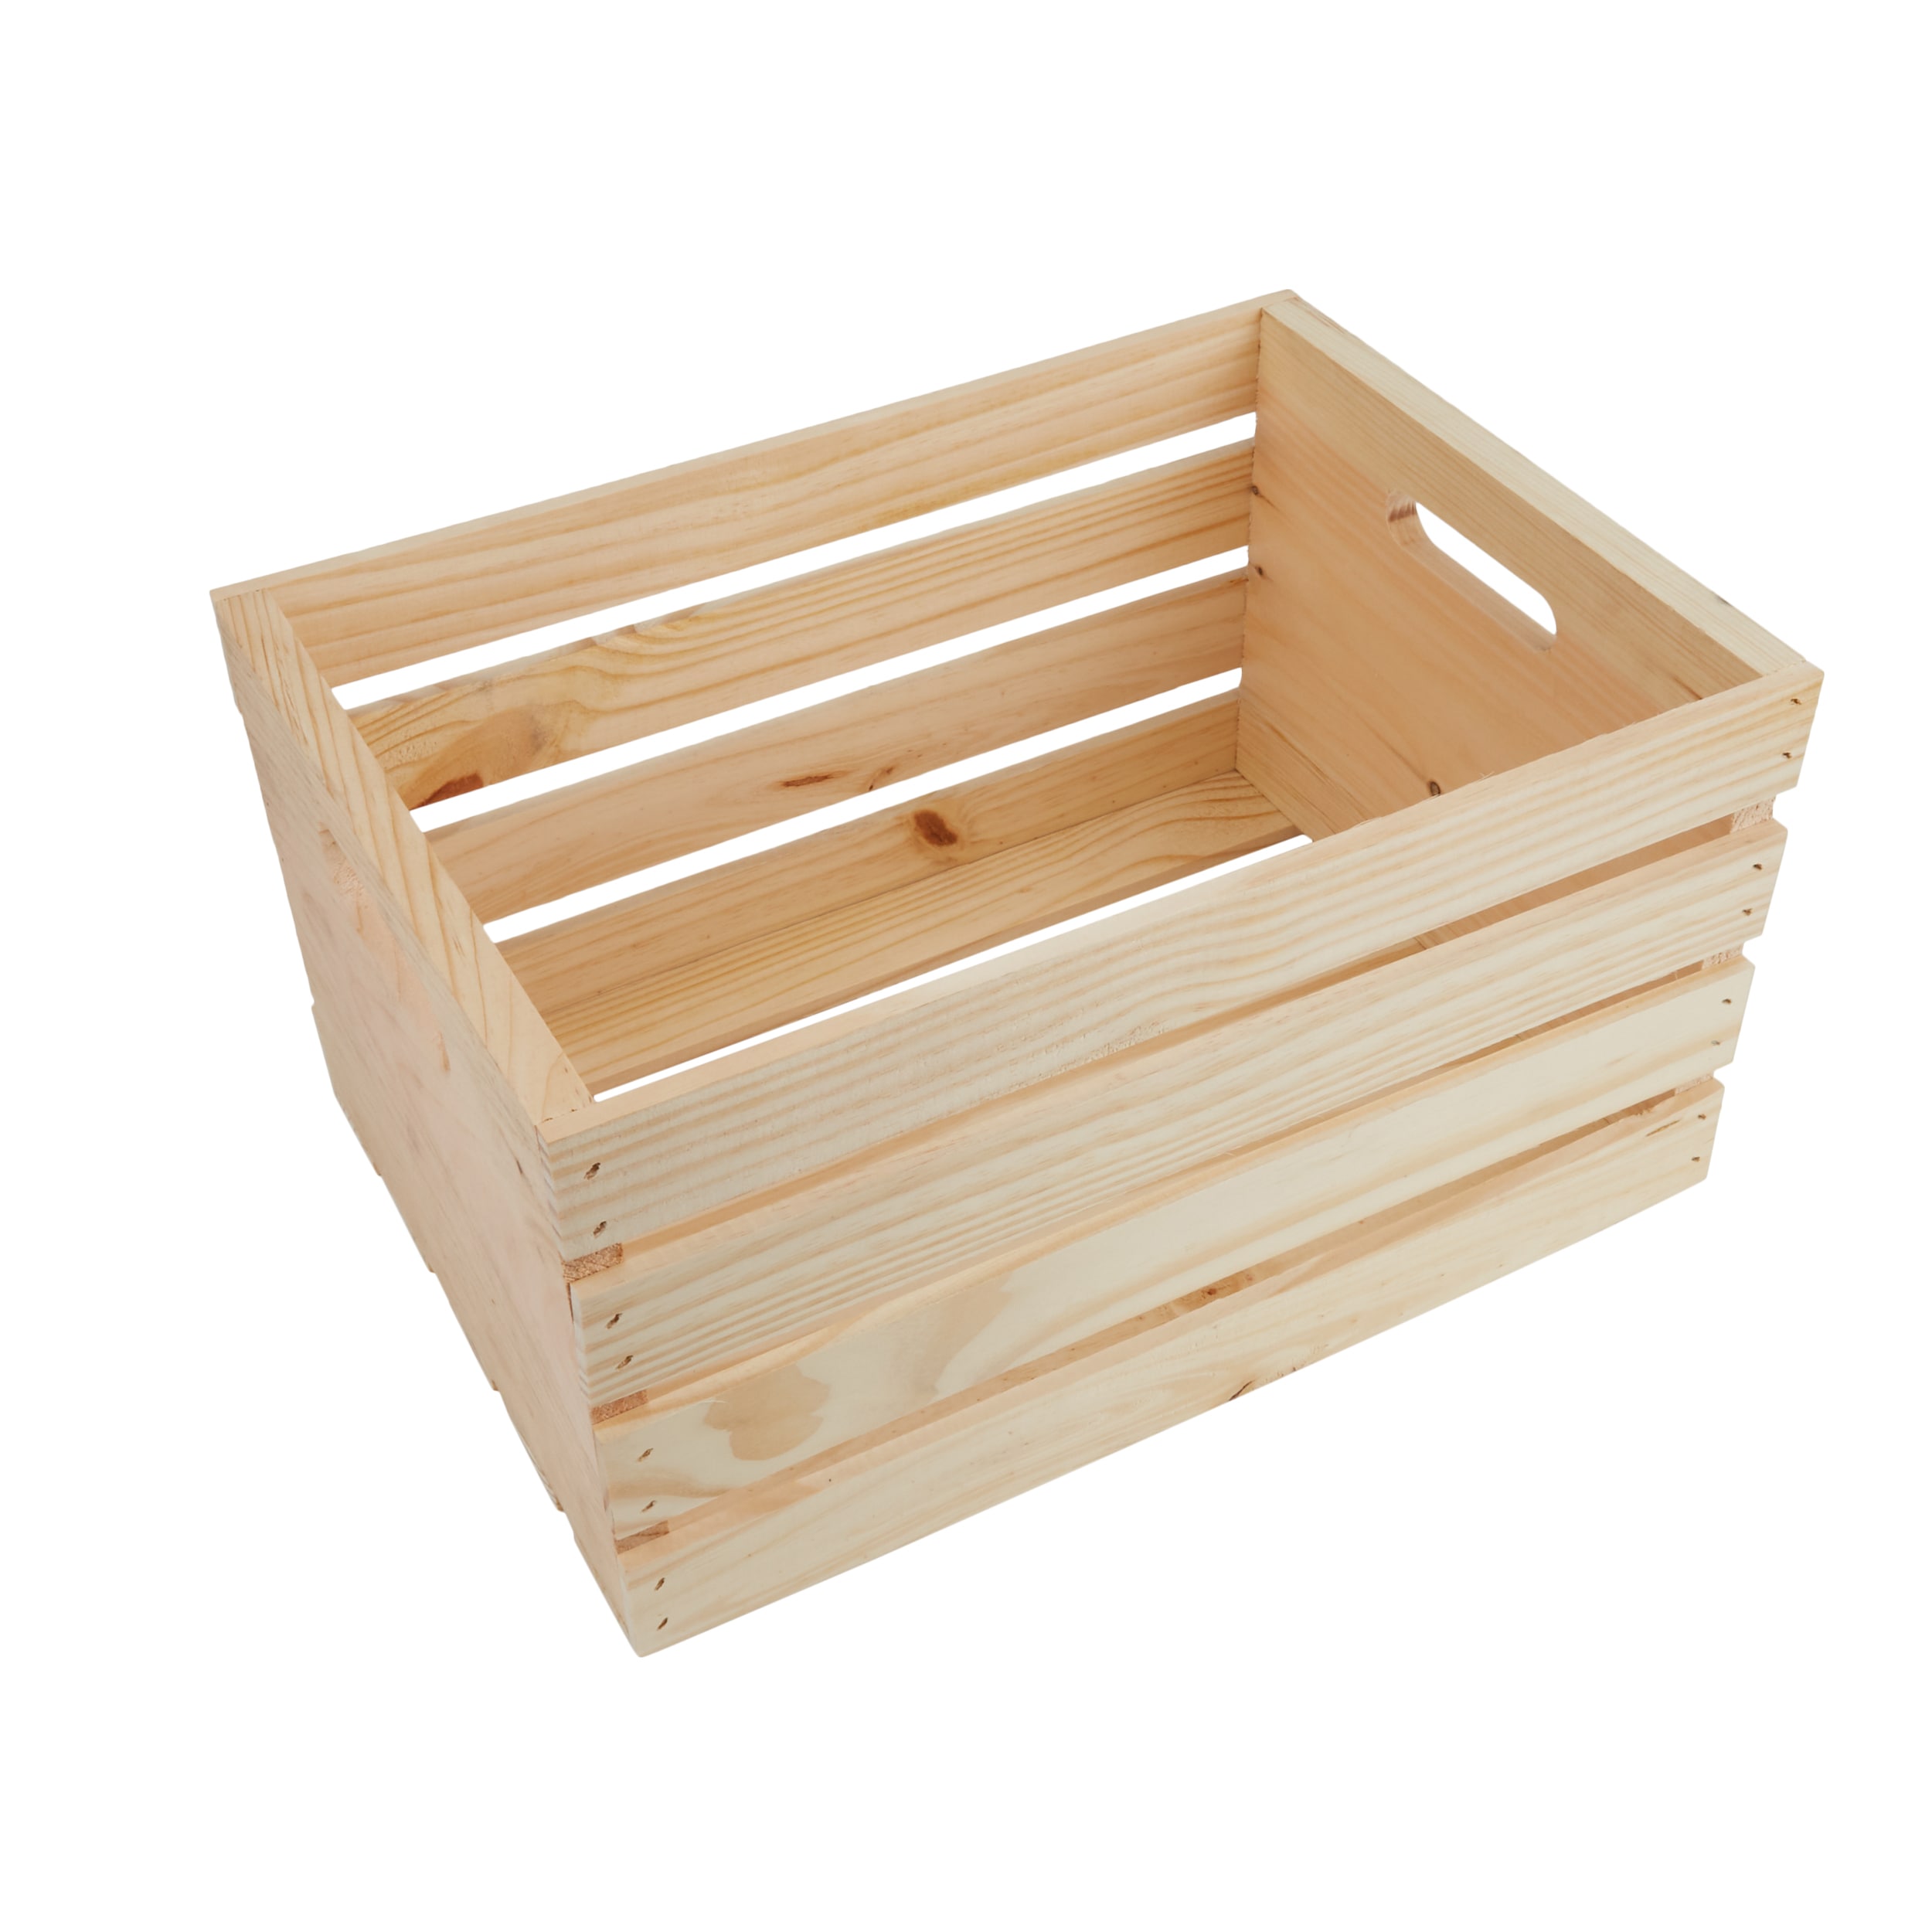 Wholesale Unfinished Wooden Boxes and Crates 